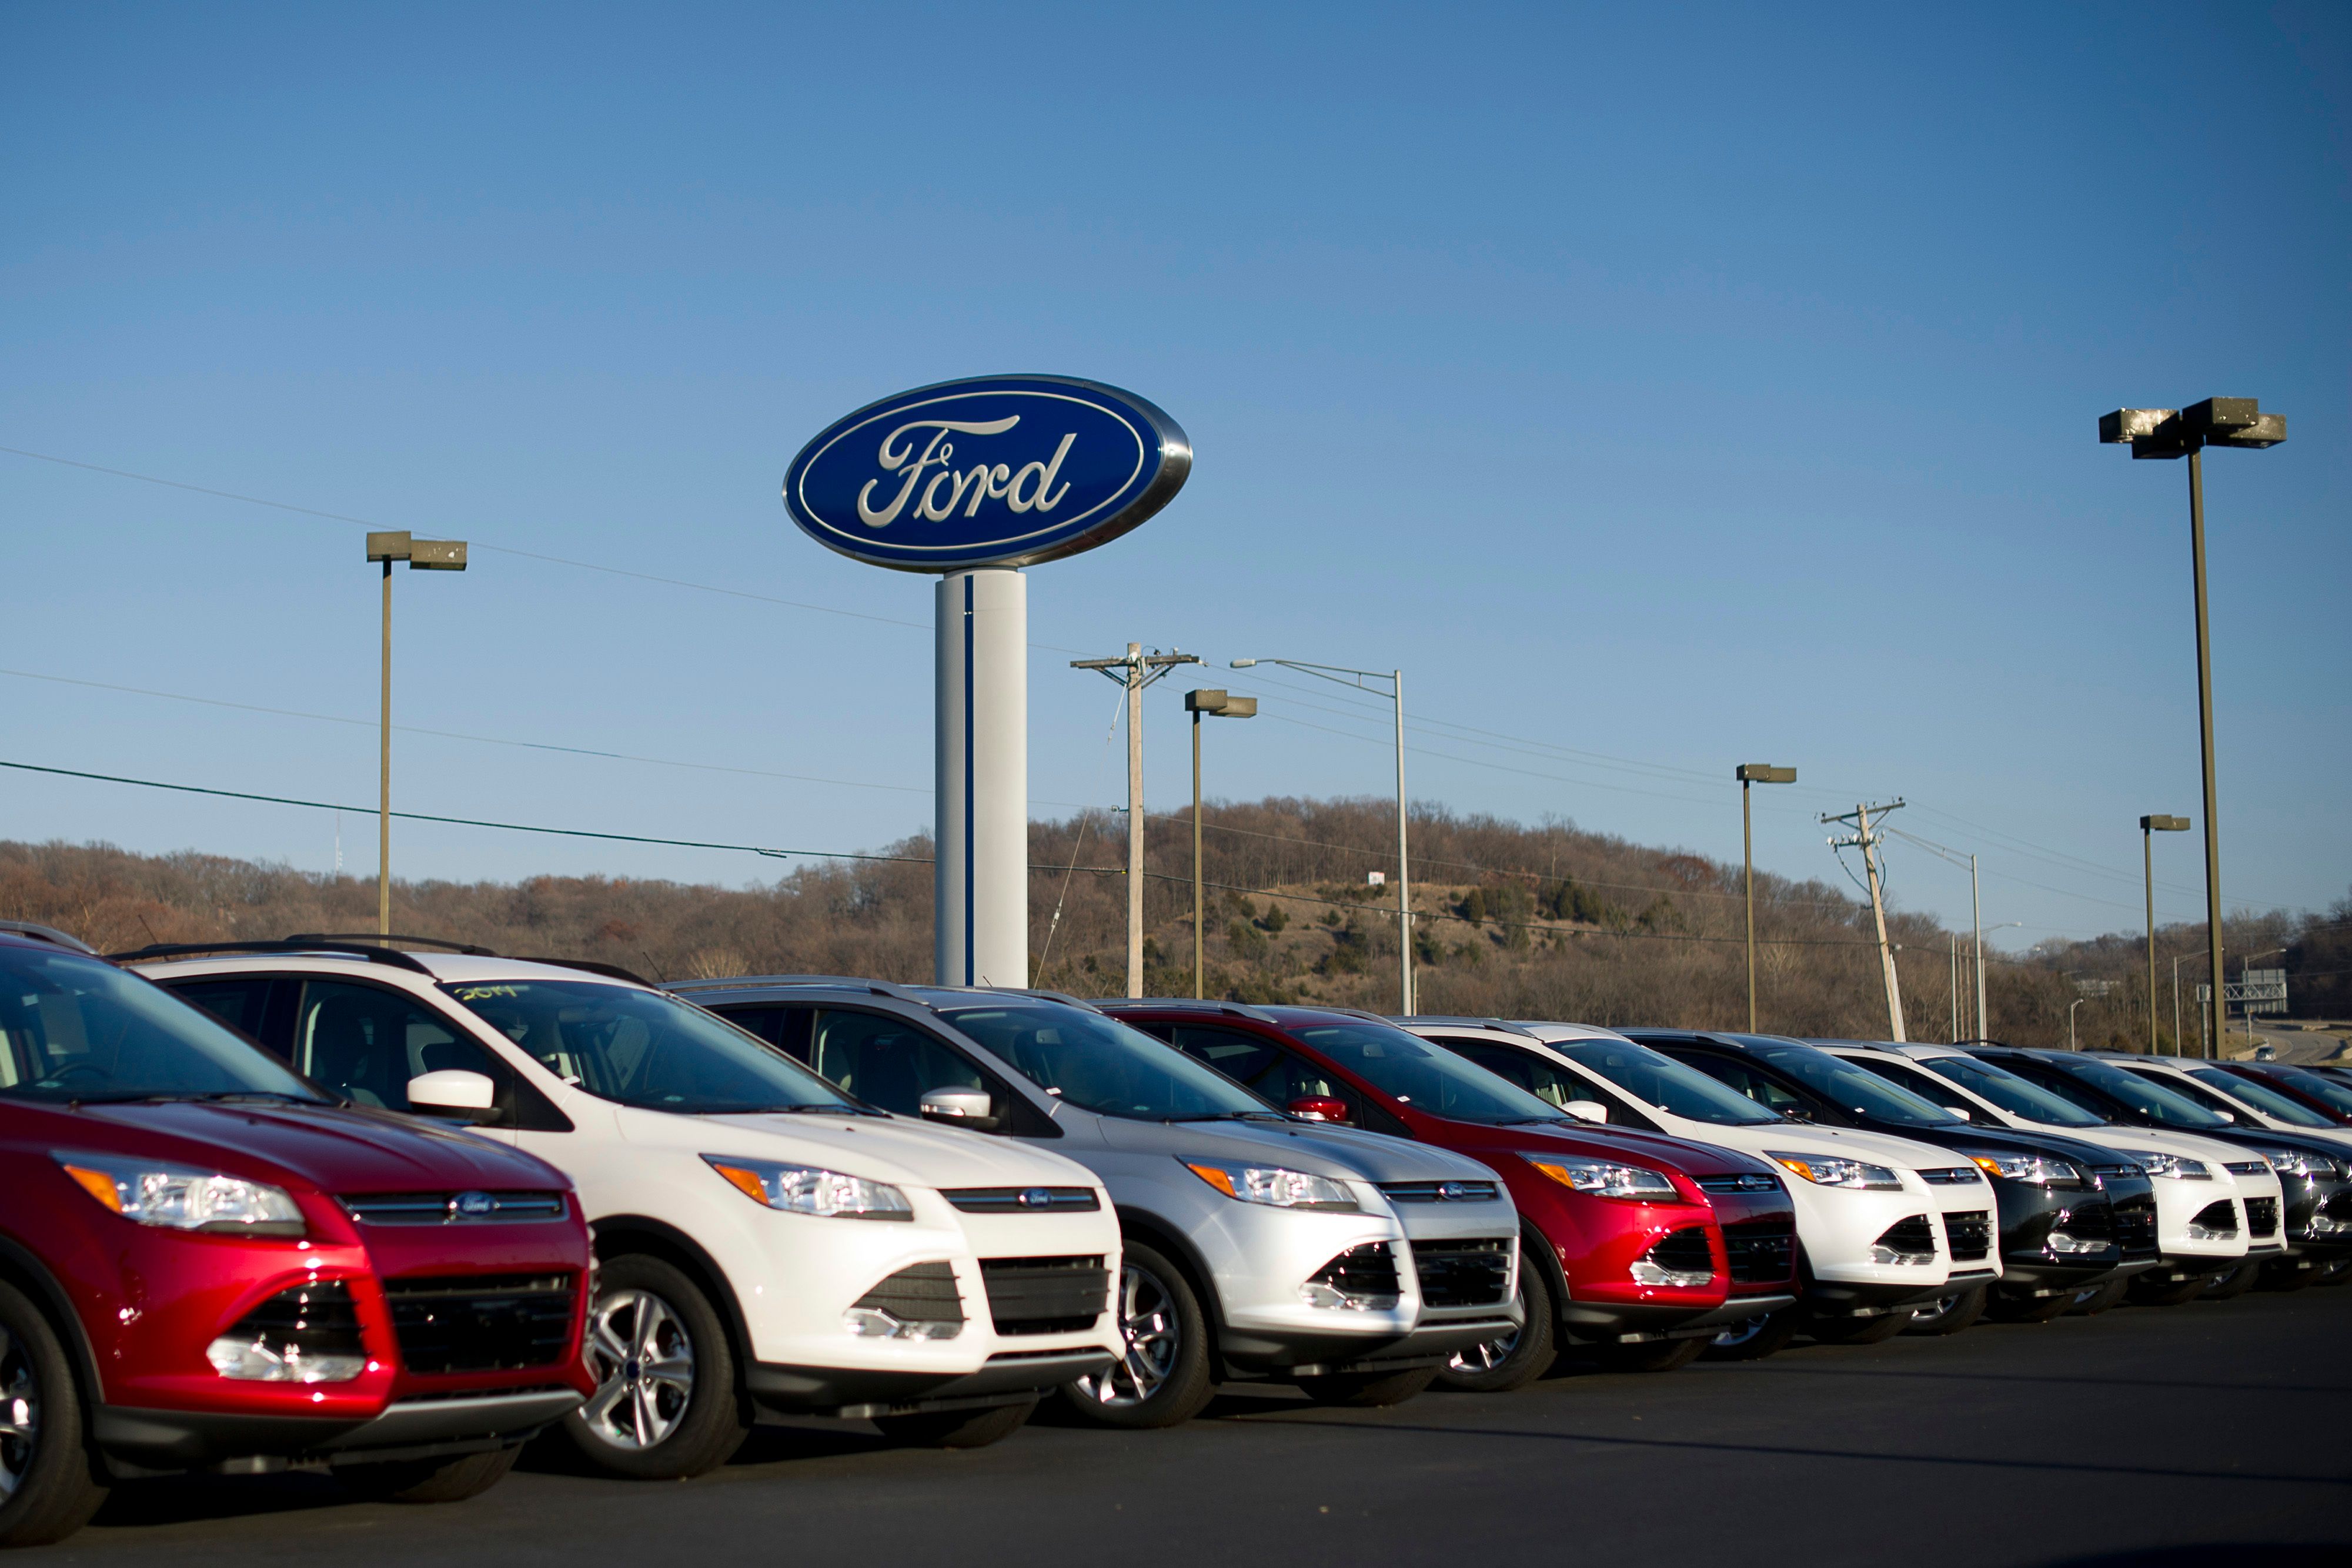 A row of 2014 Ford Motor Co. Escape vehicles sit on display at Uftring Ford in East Peoria, Illinois, U.S., on Saturday, Nov. 30, 2013. Automakers entered their year-end sales push in November with the most cars and trucks on U.S. dealer lots in eight years, a buildup thats poised to test the industrys newfound pricing discipline. Photographer: Daniel Acker/Bloomberg via Getty Images